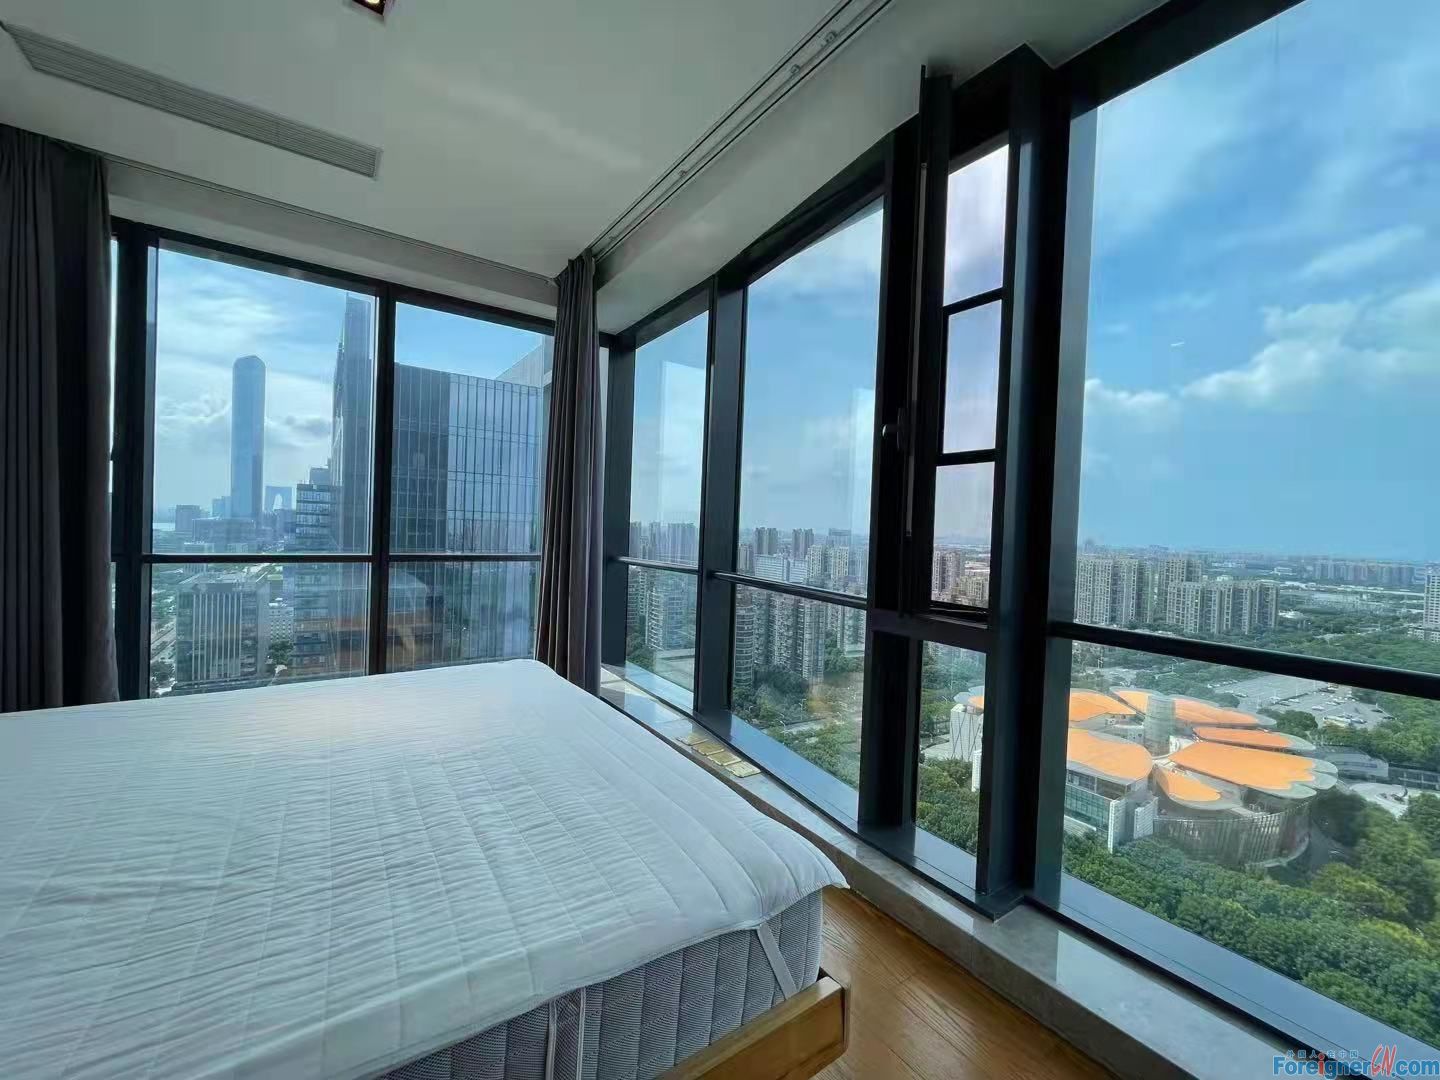 Fabulous！！Skyline Apartment in SIP/ 2 bedrooms and 1 bath/High Floor to enjoy Baitang Park Scenery/the gate of the Orient /The bright rooms with French Windows